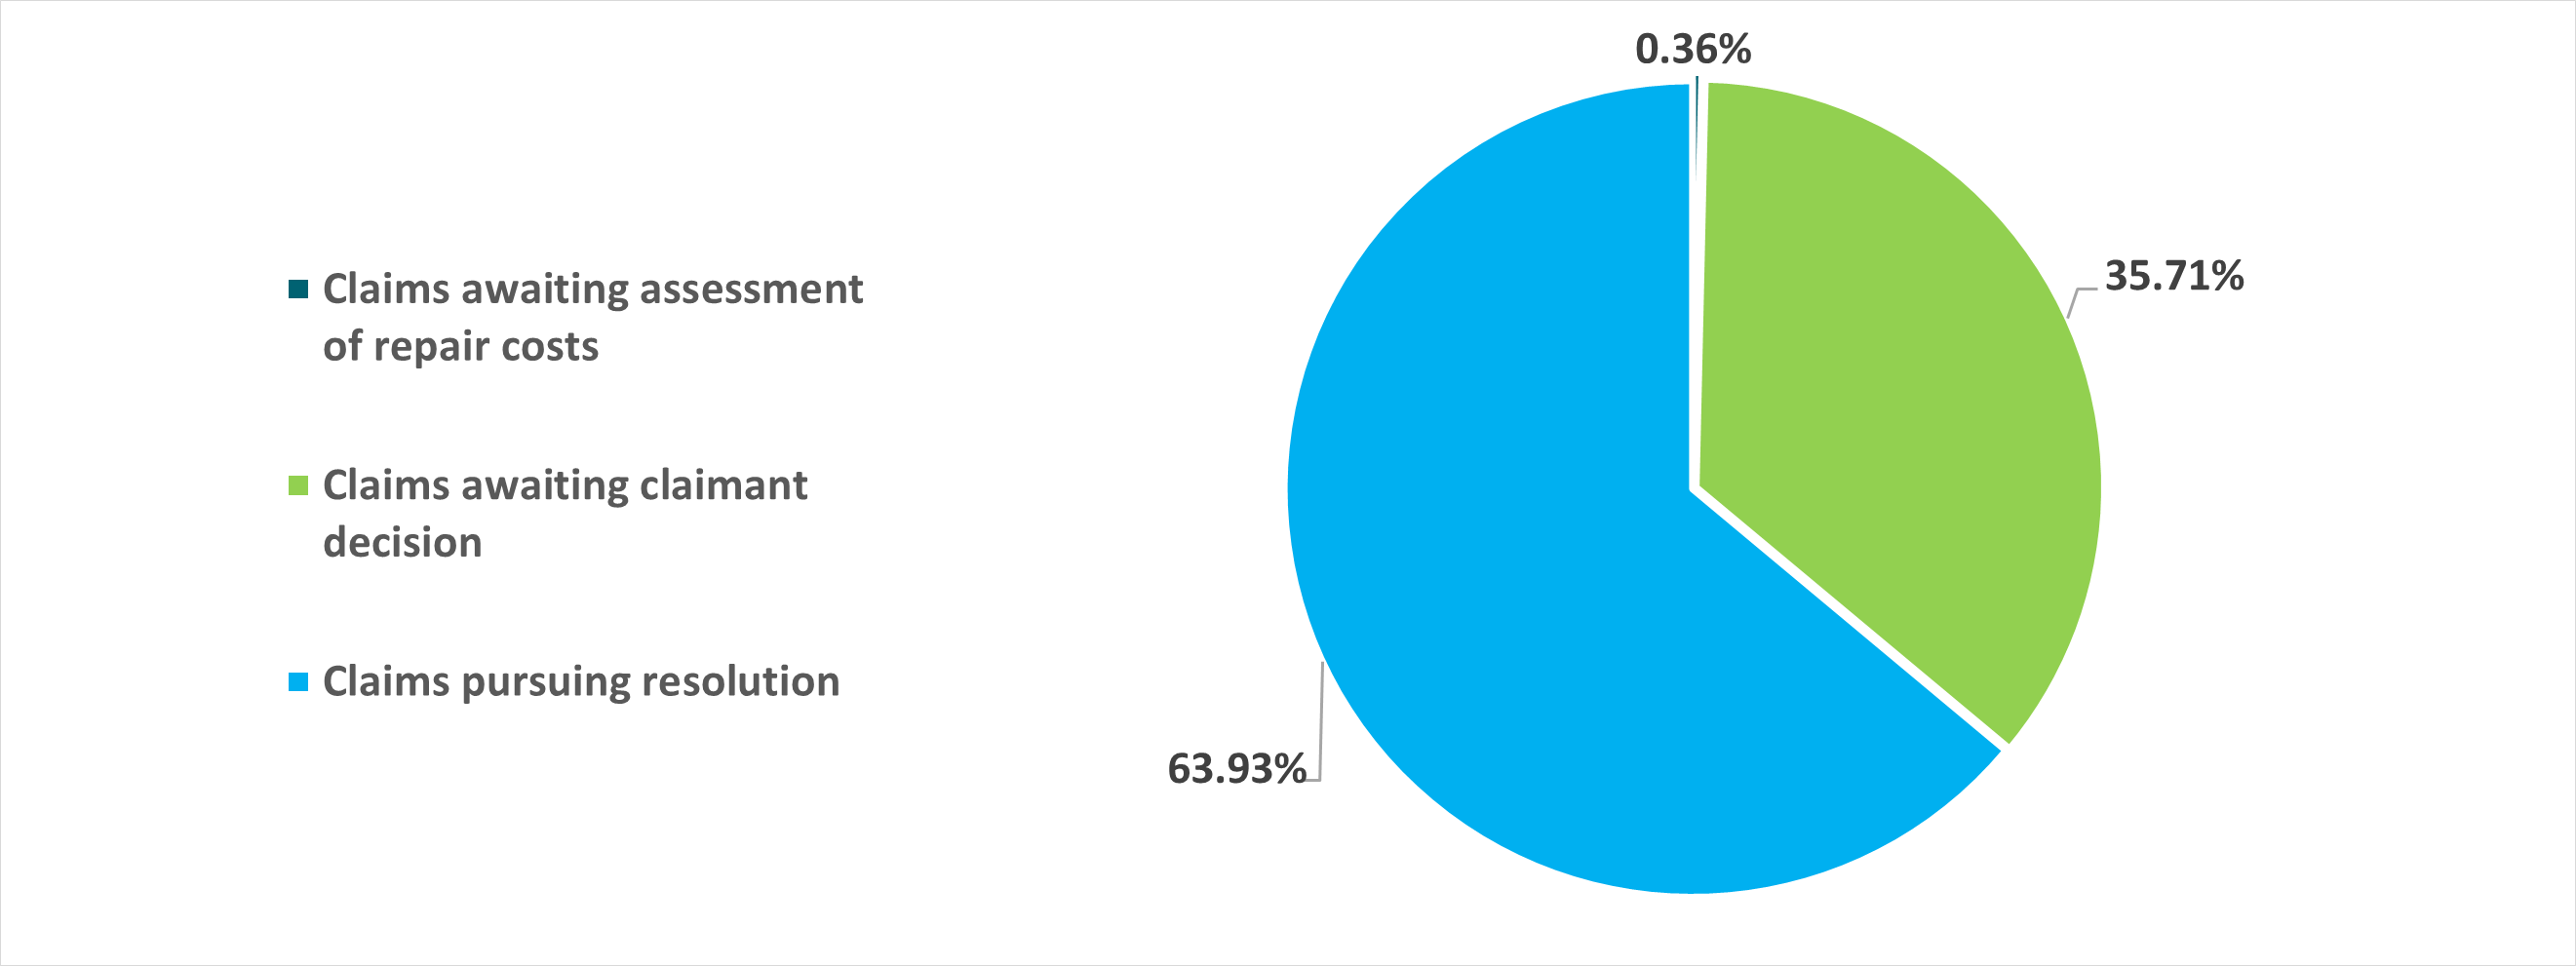 Pie chart displaying the data listed below.